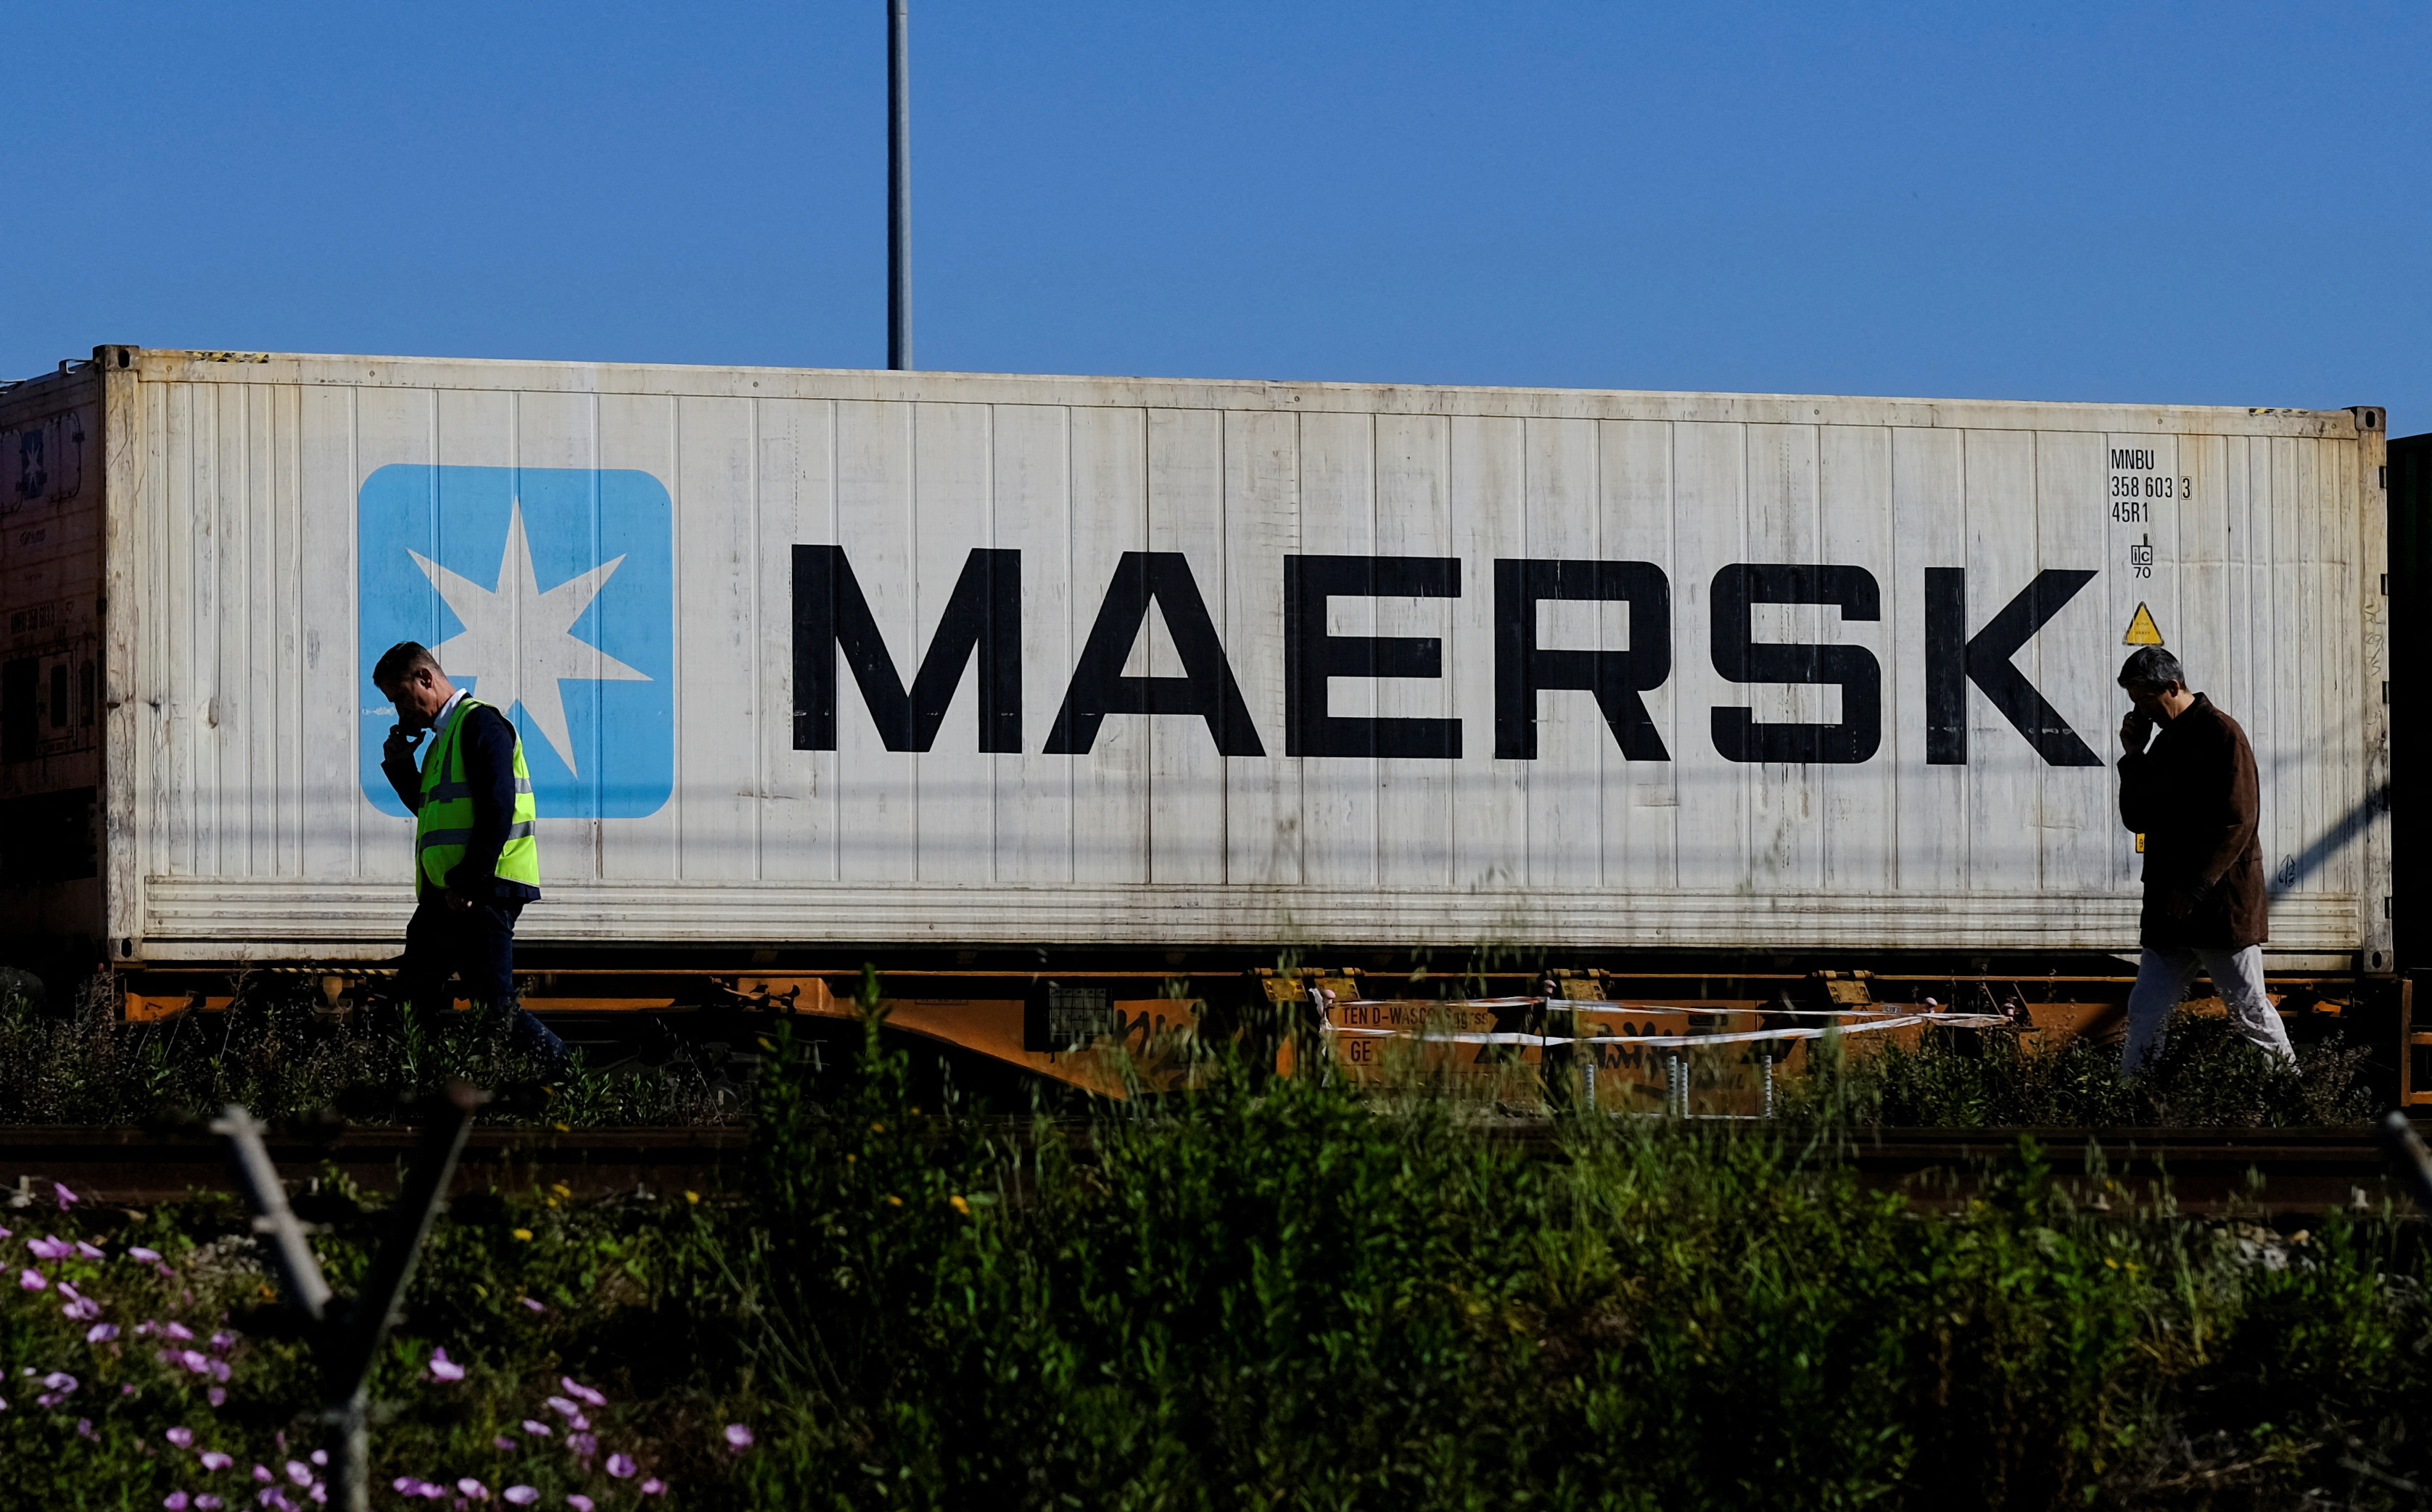 Workers talk on their mobile phones as a Maersk container is transported by a train near a port of Barcelona